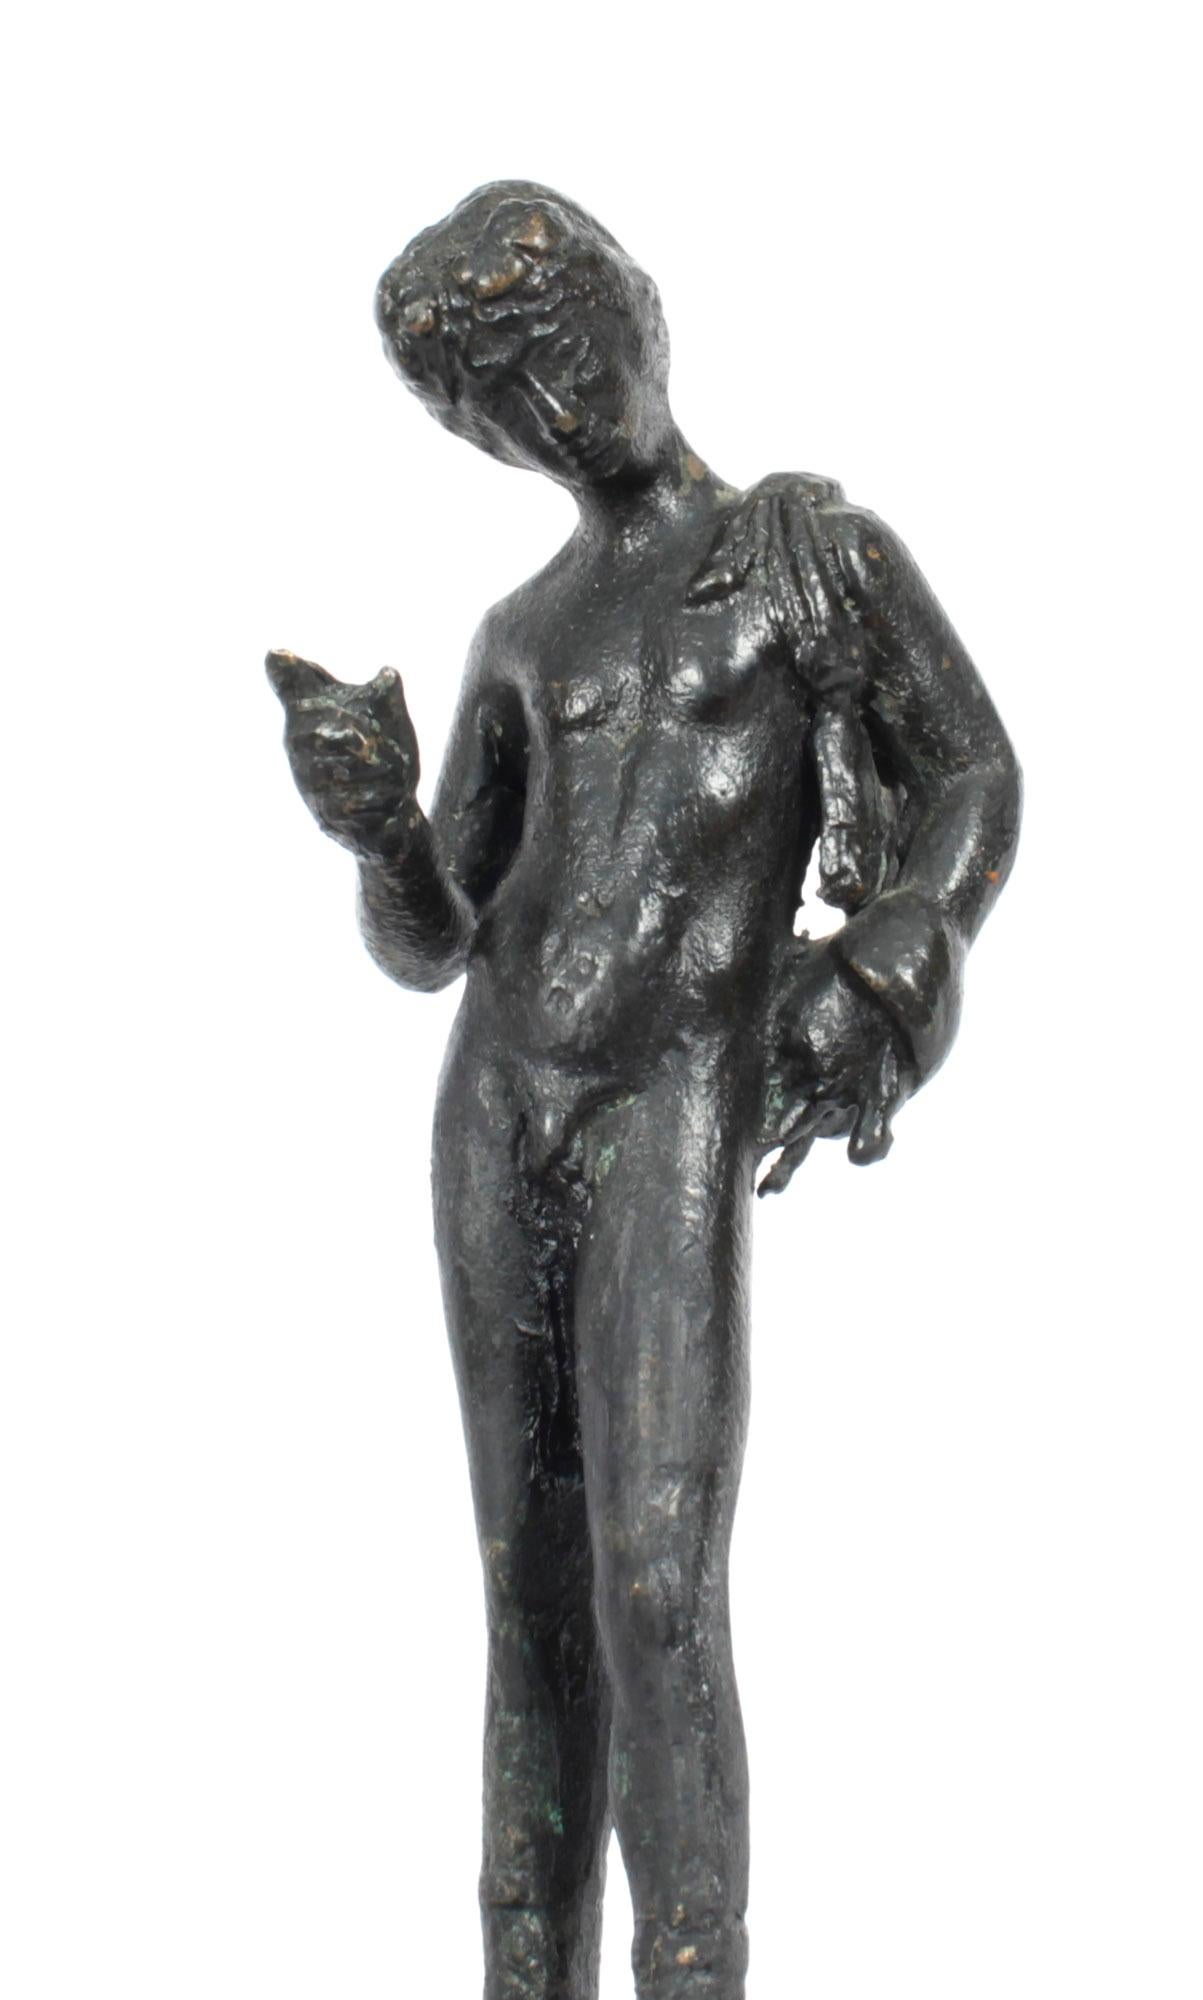 This is a superb antique novelty Grand Tour patinated bronze figure of Narcissus, dating from the late 19th Century.

Narcissus was a hunter in Greek mythology and he was distinguished for his beauty.
 
This patinated bronze classical figure is